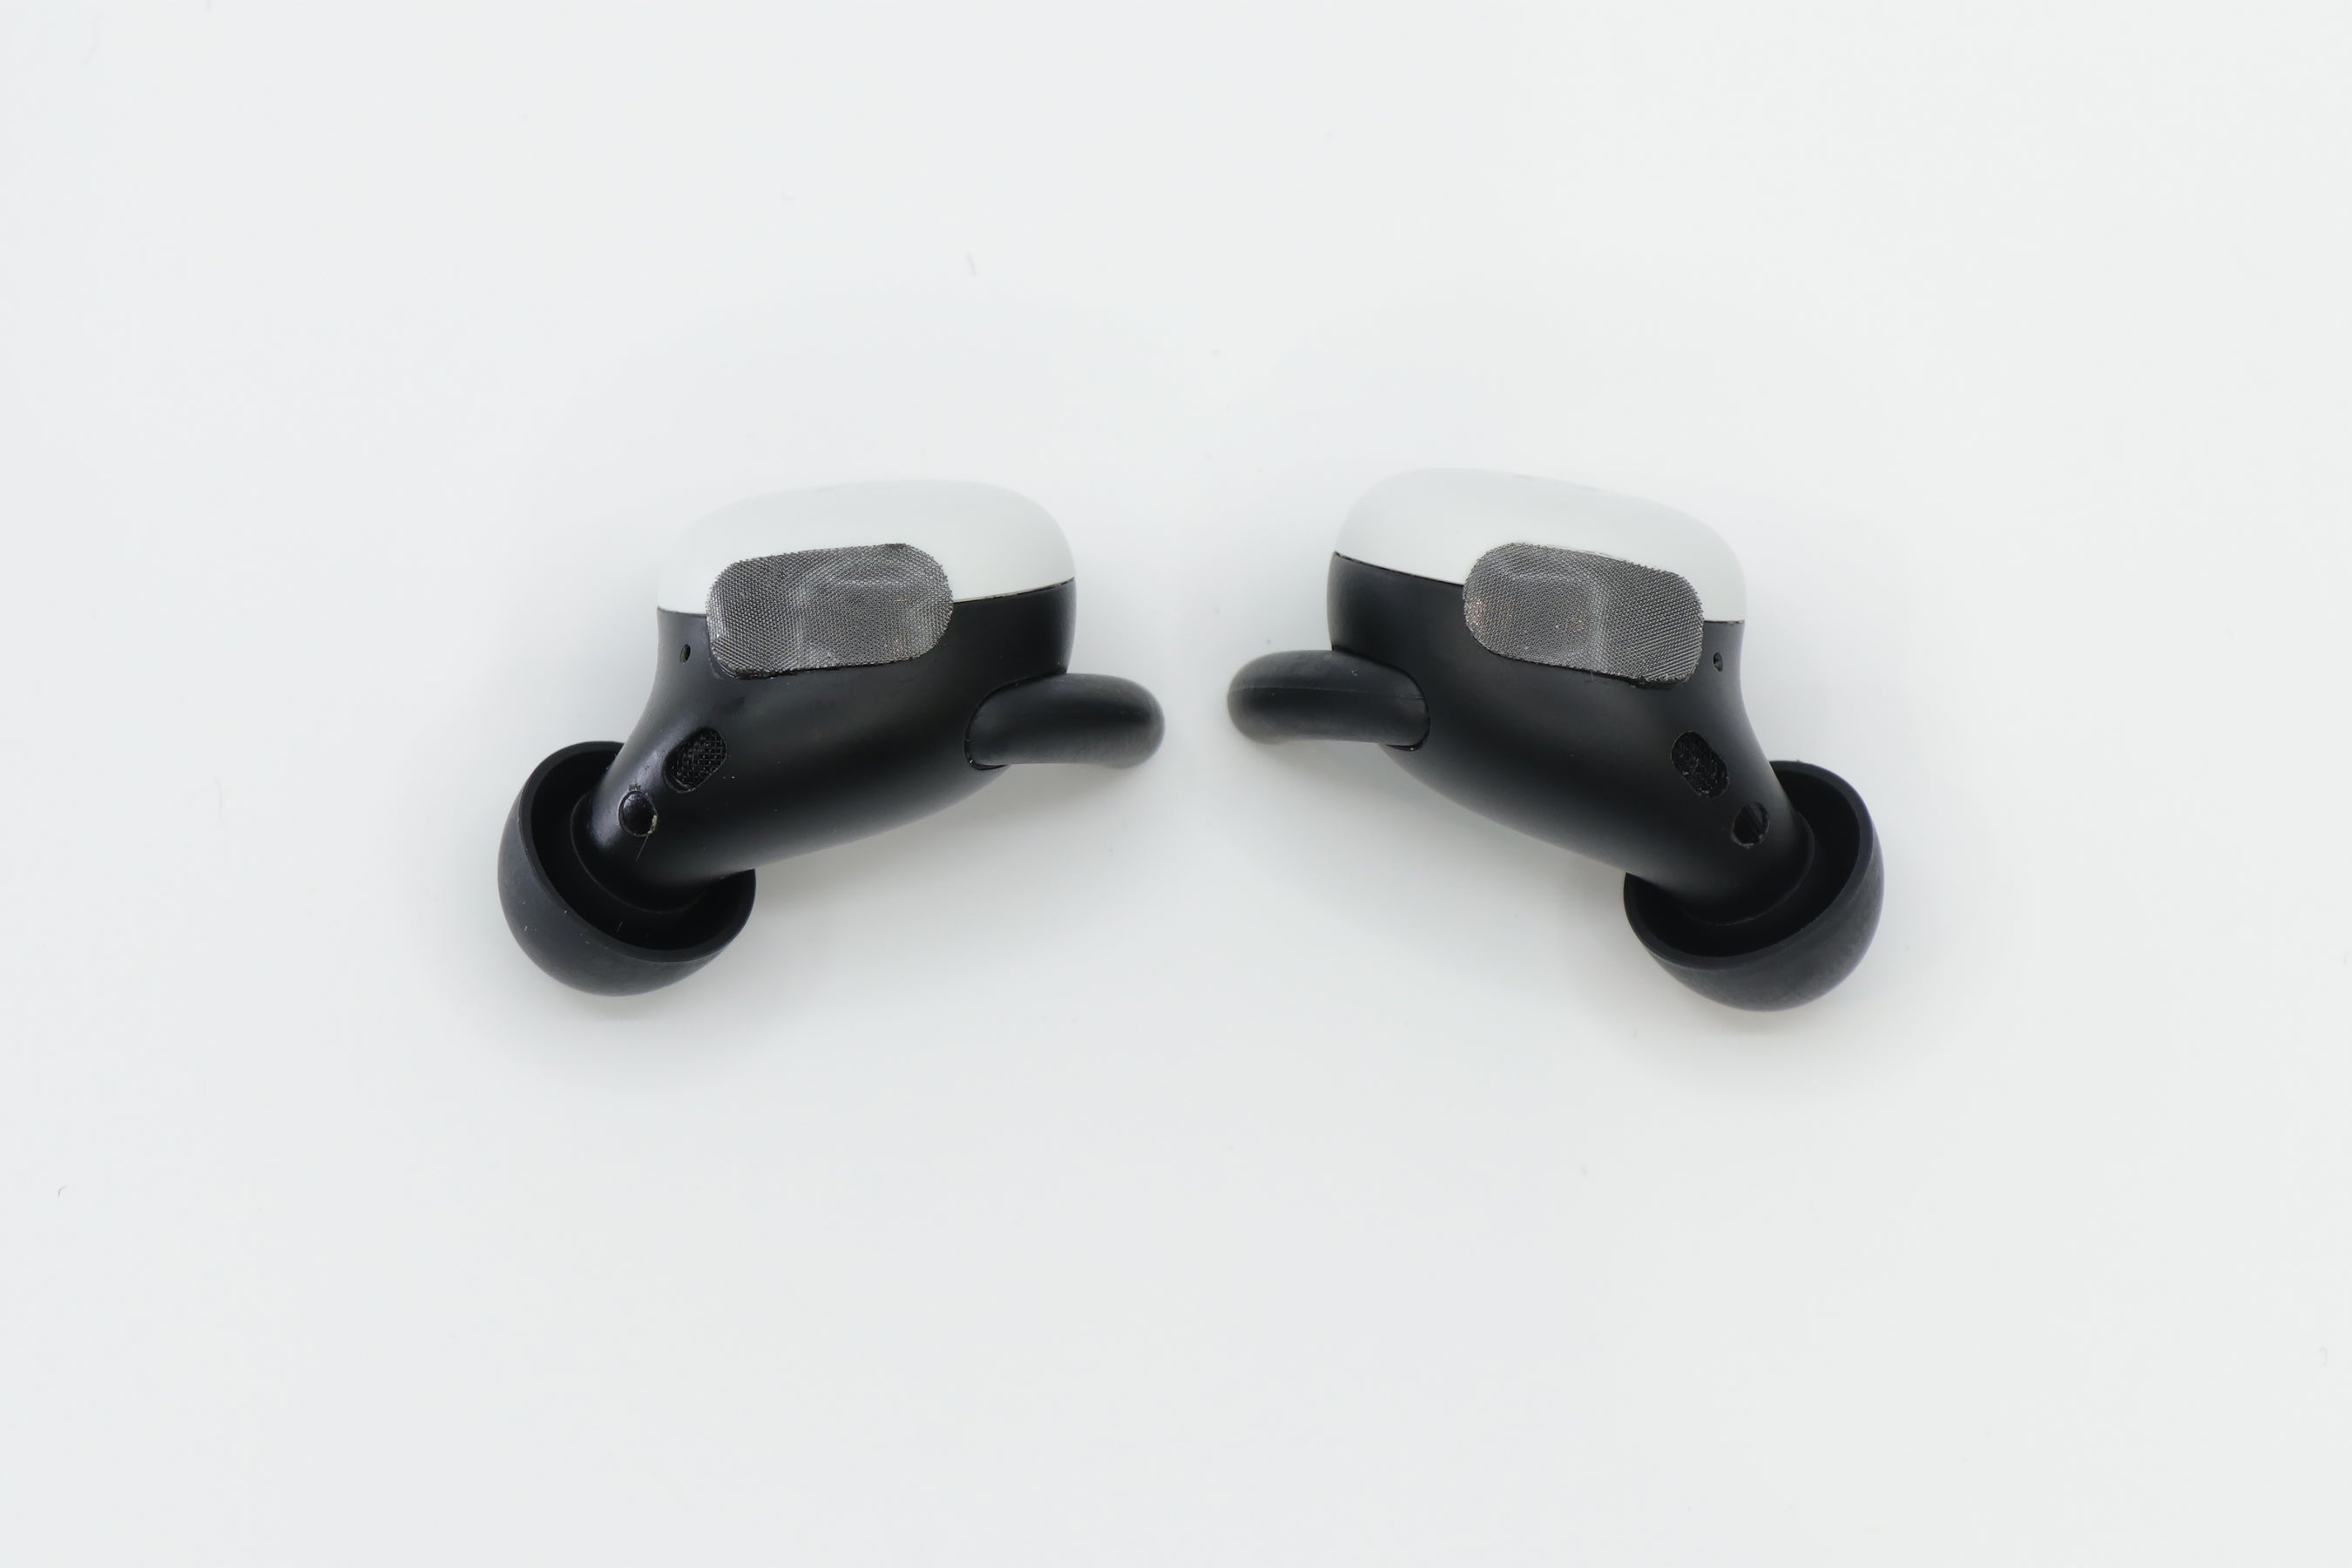 Setex® Earbud Grips - For Wireless Earbuds